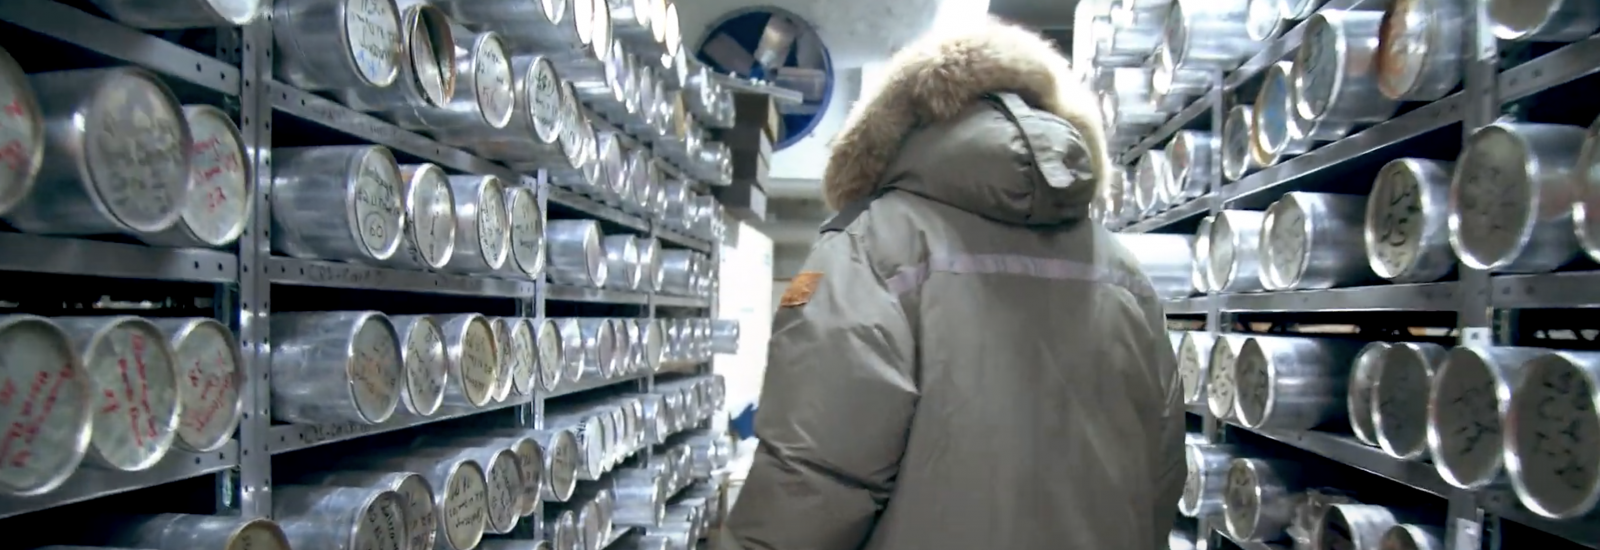 Lonnie Thompson from behind wearing a grey winter coat. He is walking through the ice core freezer and is surrounded by ice cores (long silver cores) on shelves on both sides.